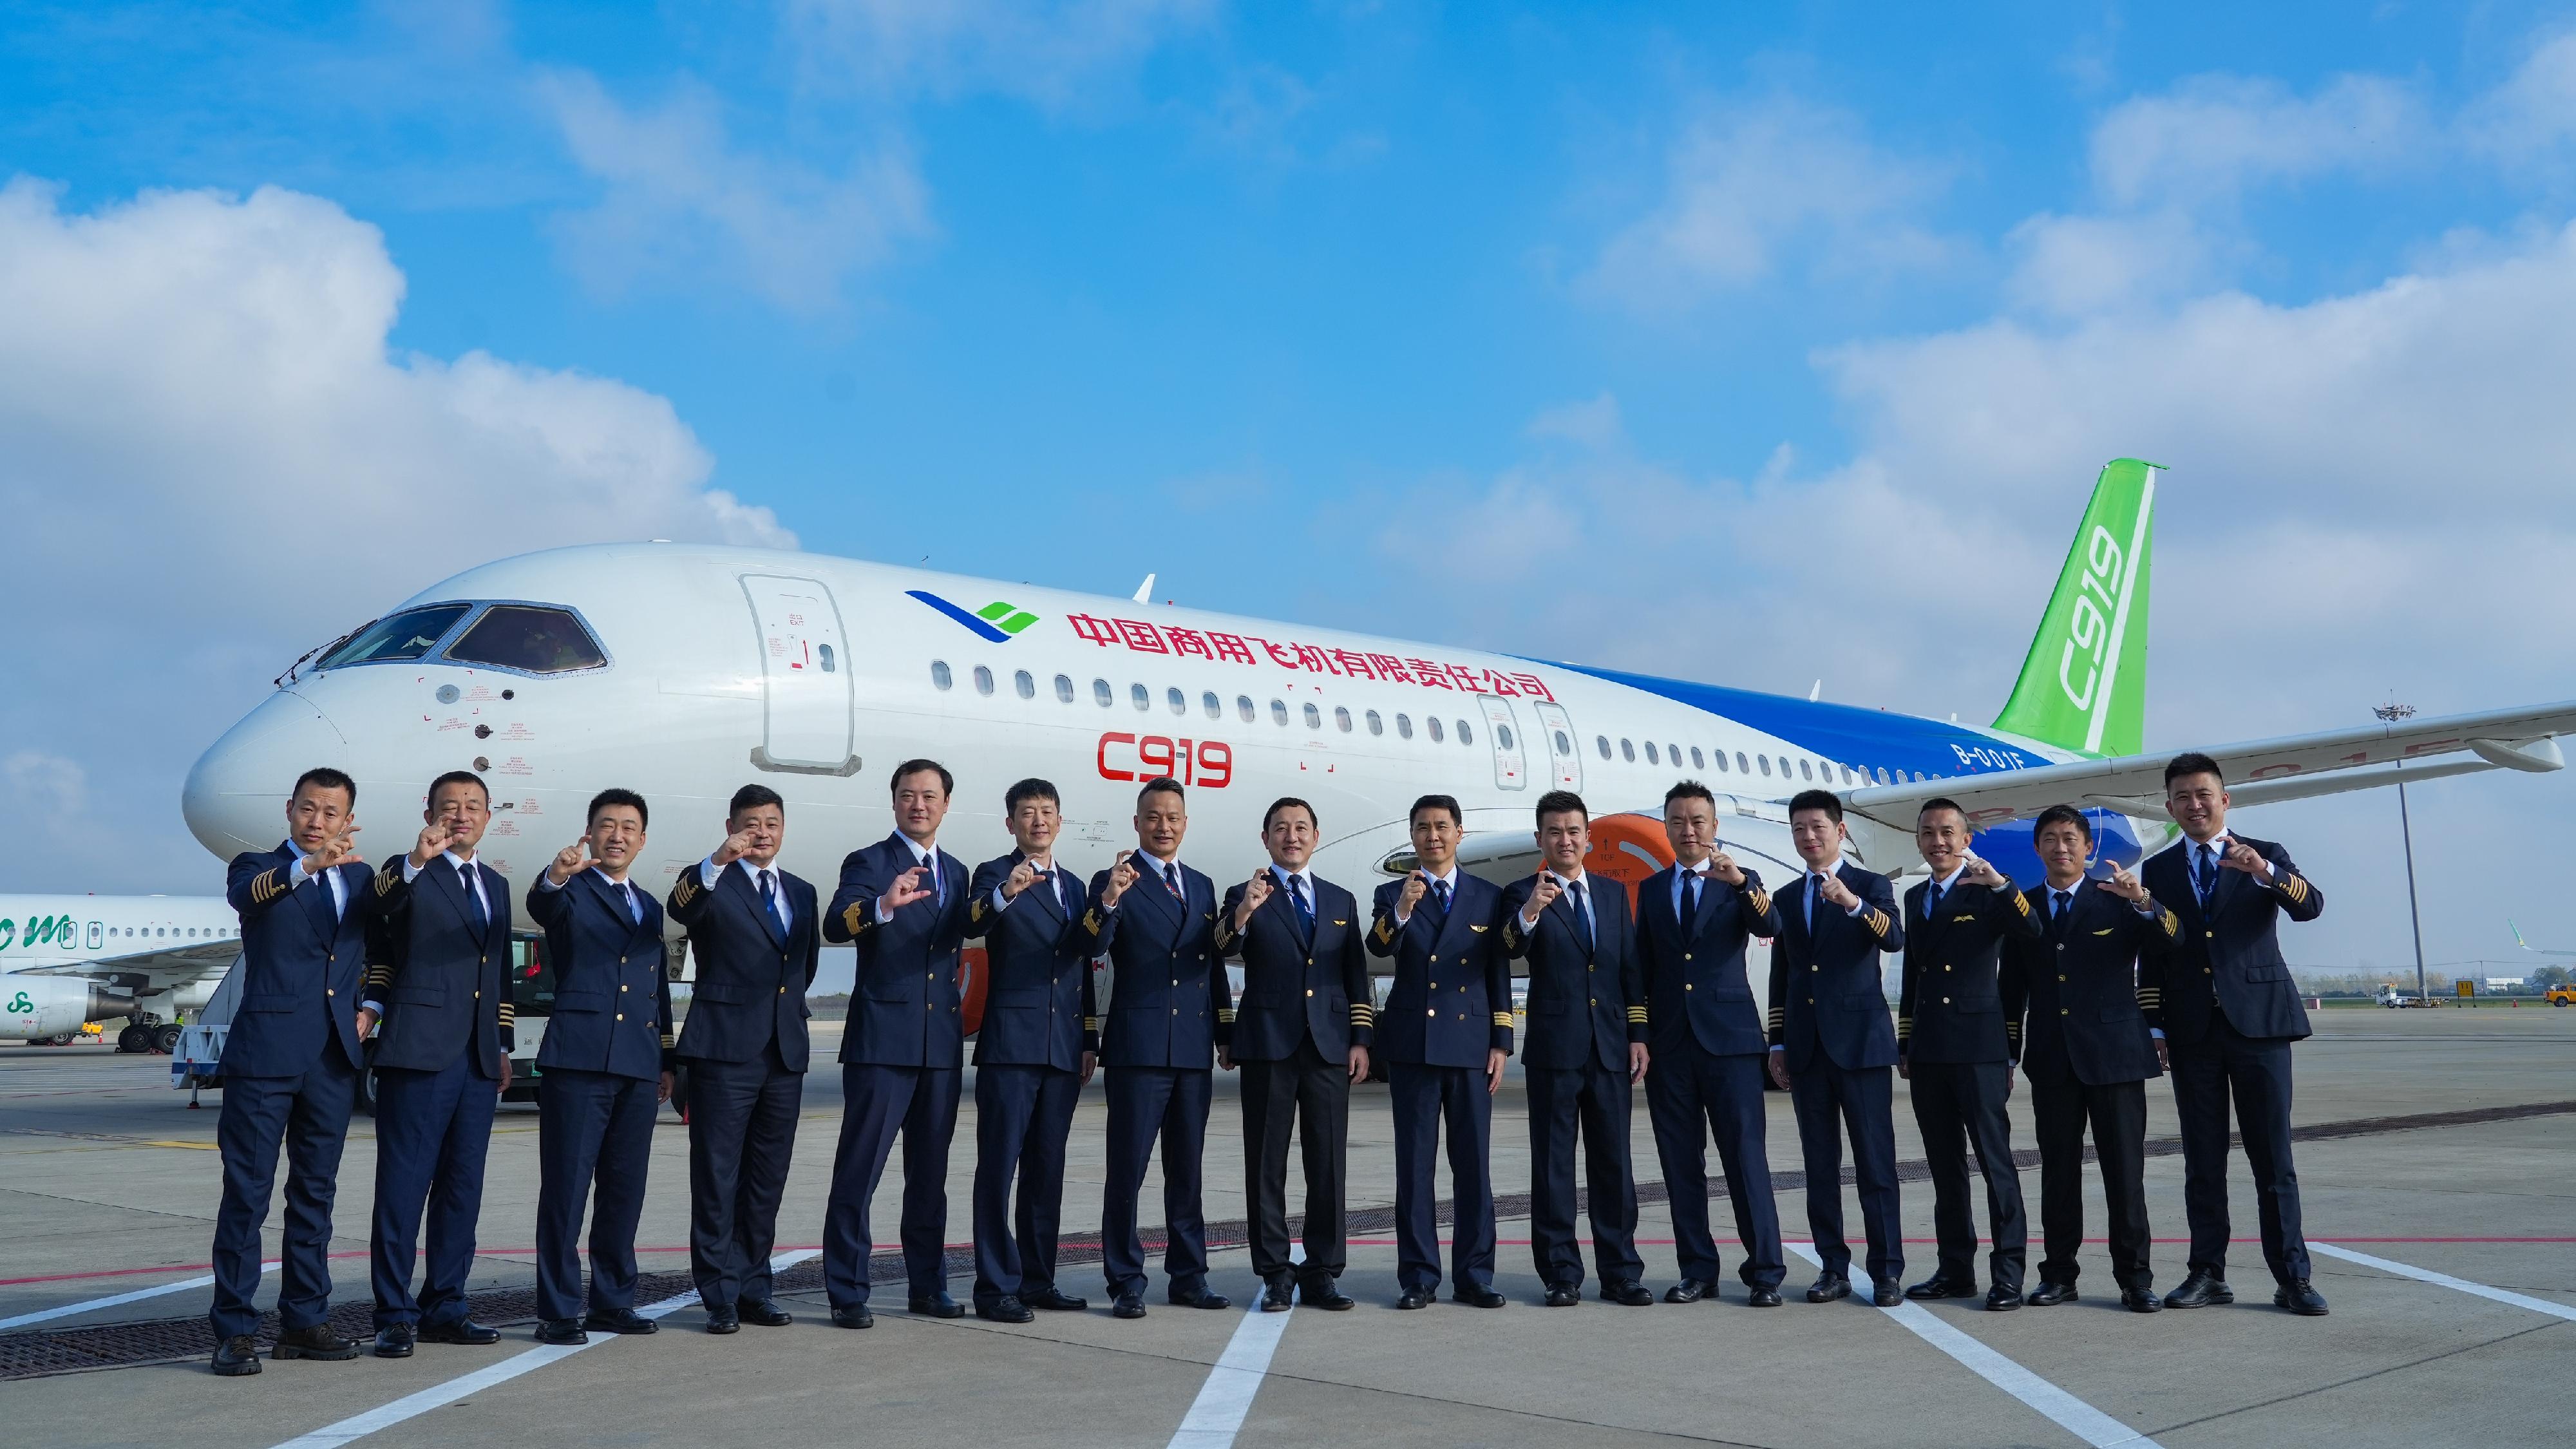 Fifteen flight operations experts from the Civil Aviation Administration of China, China Eastern Airlines, Commercial Aircraft Corporation of China and the Hong Kong Civil Aviation Department (CAD) successfully completed the two-month C919 T5 Test for flight crew training in Shanghai. Photo shows Captain Joe Lee (third right) from the CAD is pictured in front of the C919 aircraft with other flight operations experts participating in the Test.